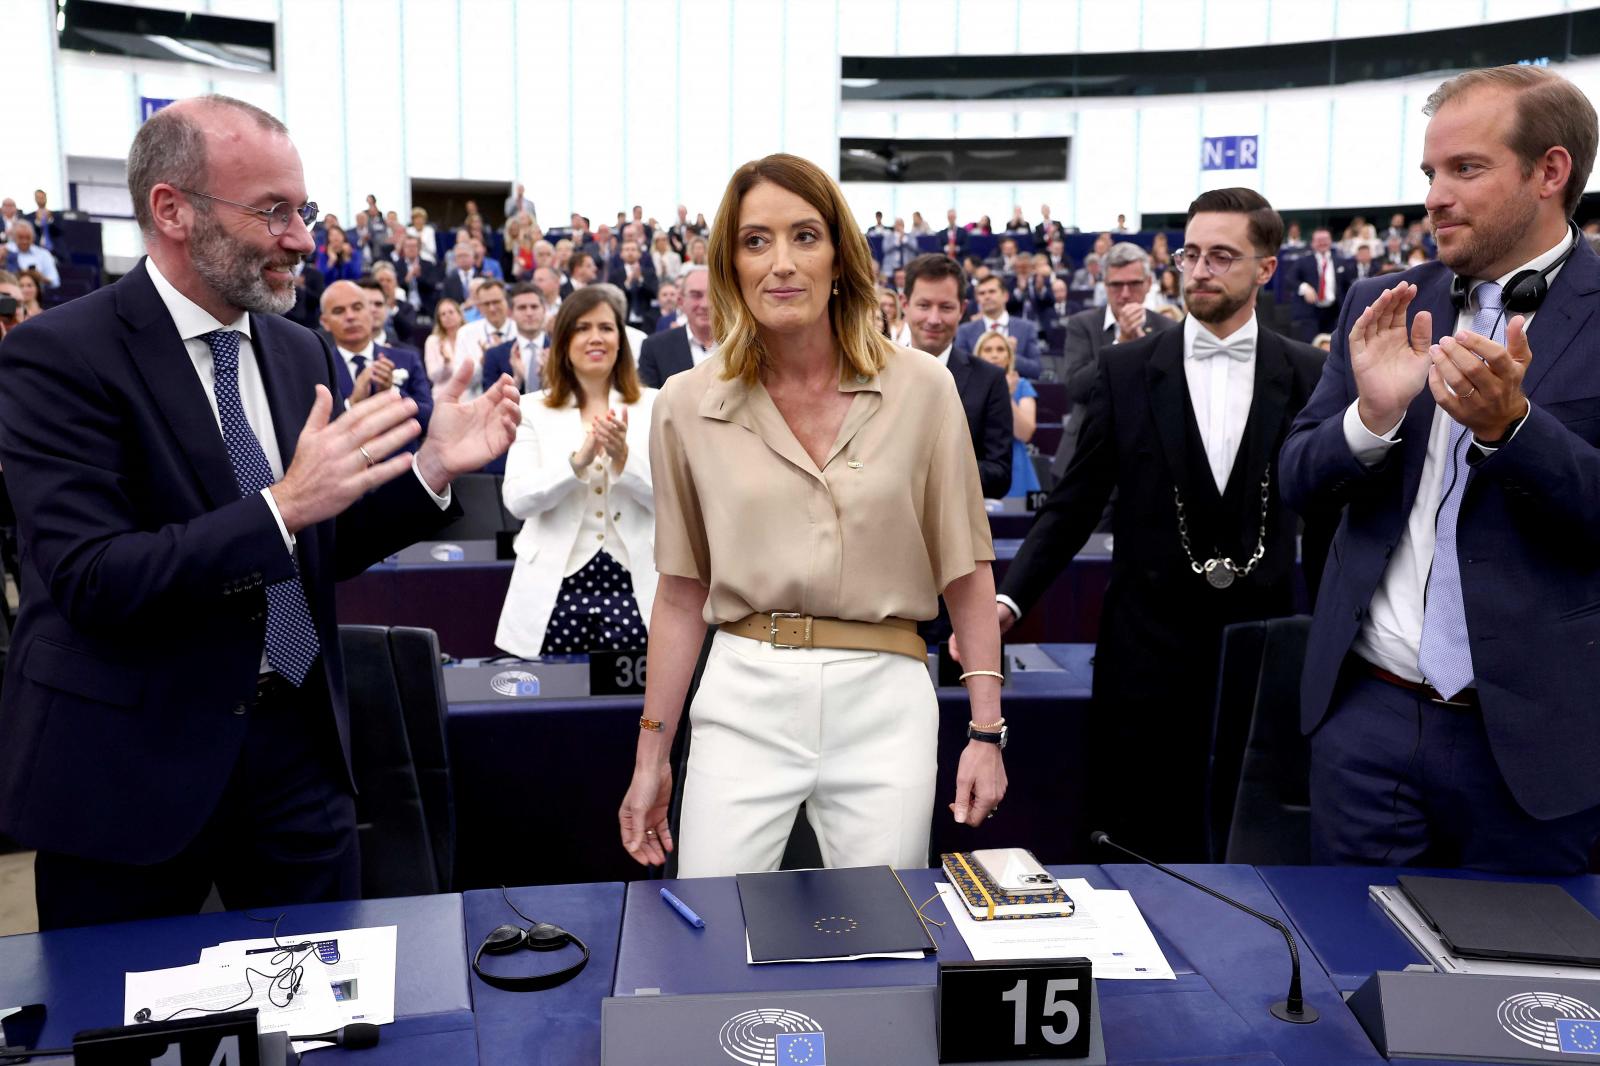 Roberta Metsola was re-elected President of the European Parliament after winning the vote against Irene Monteiro